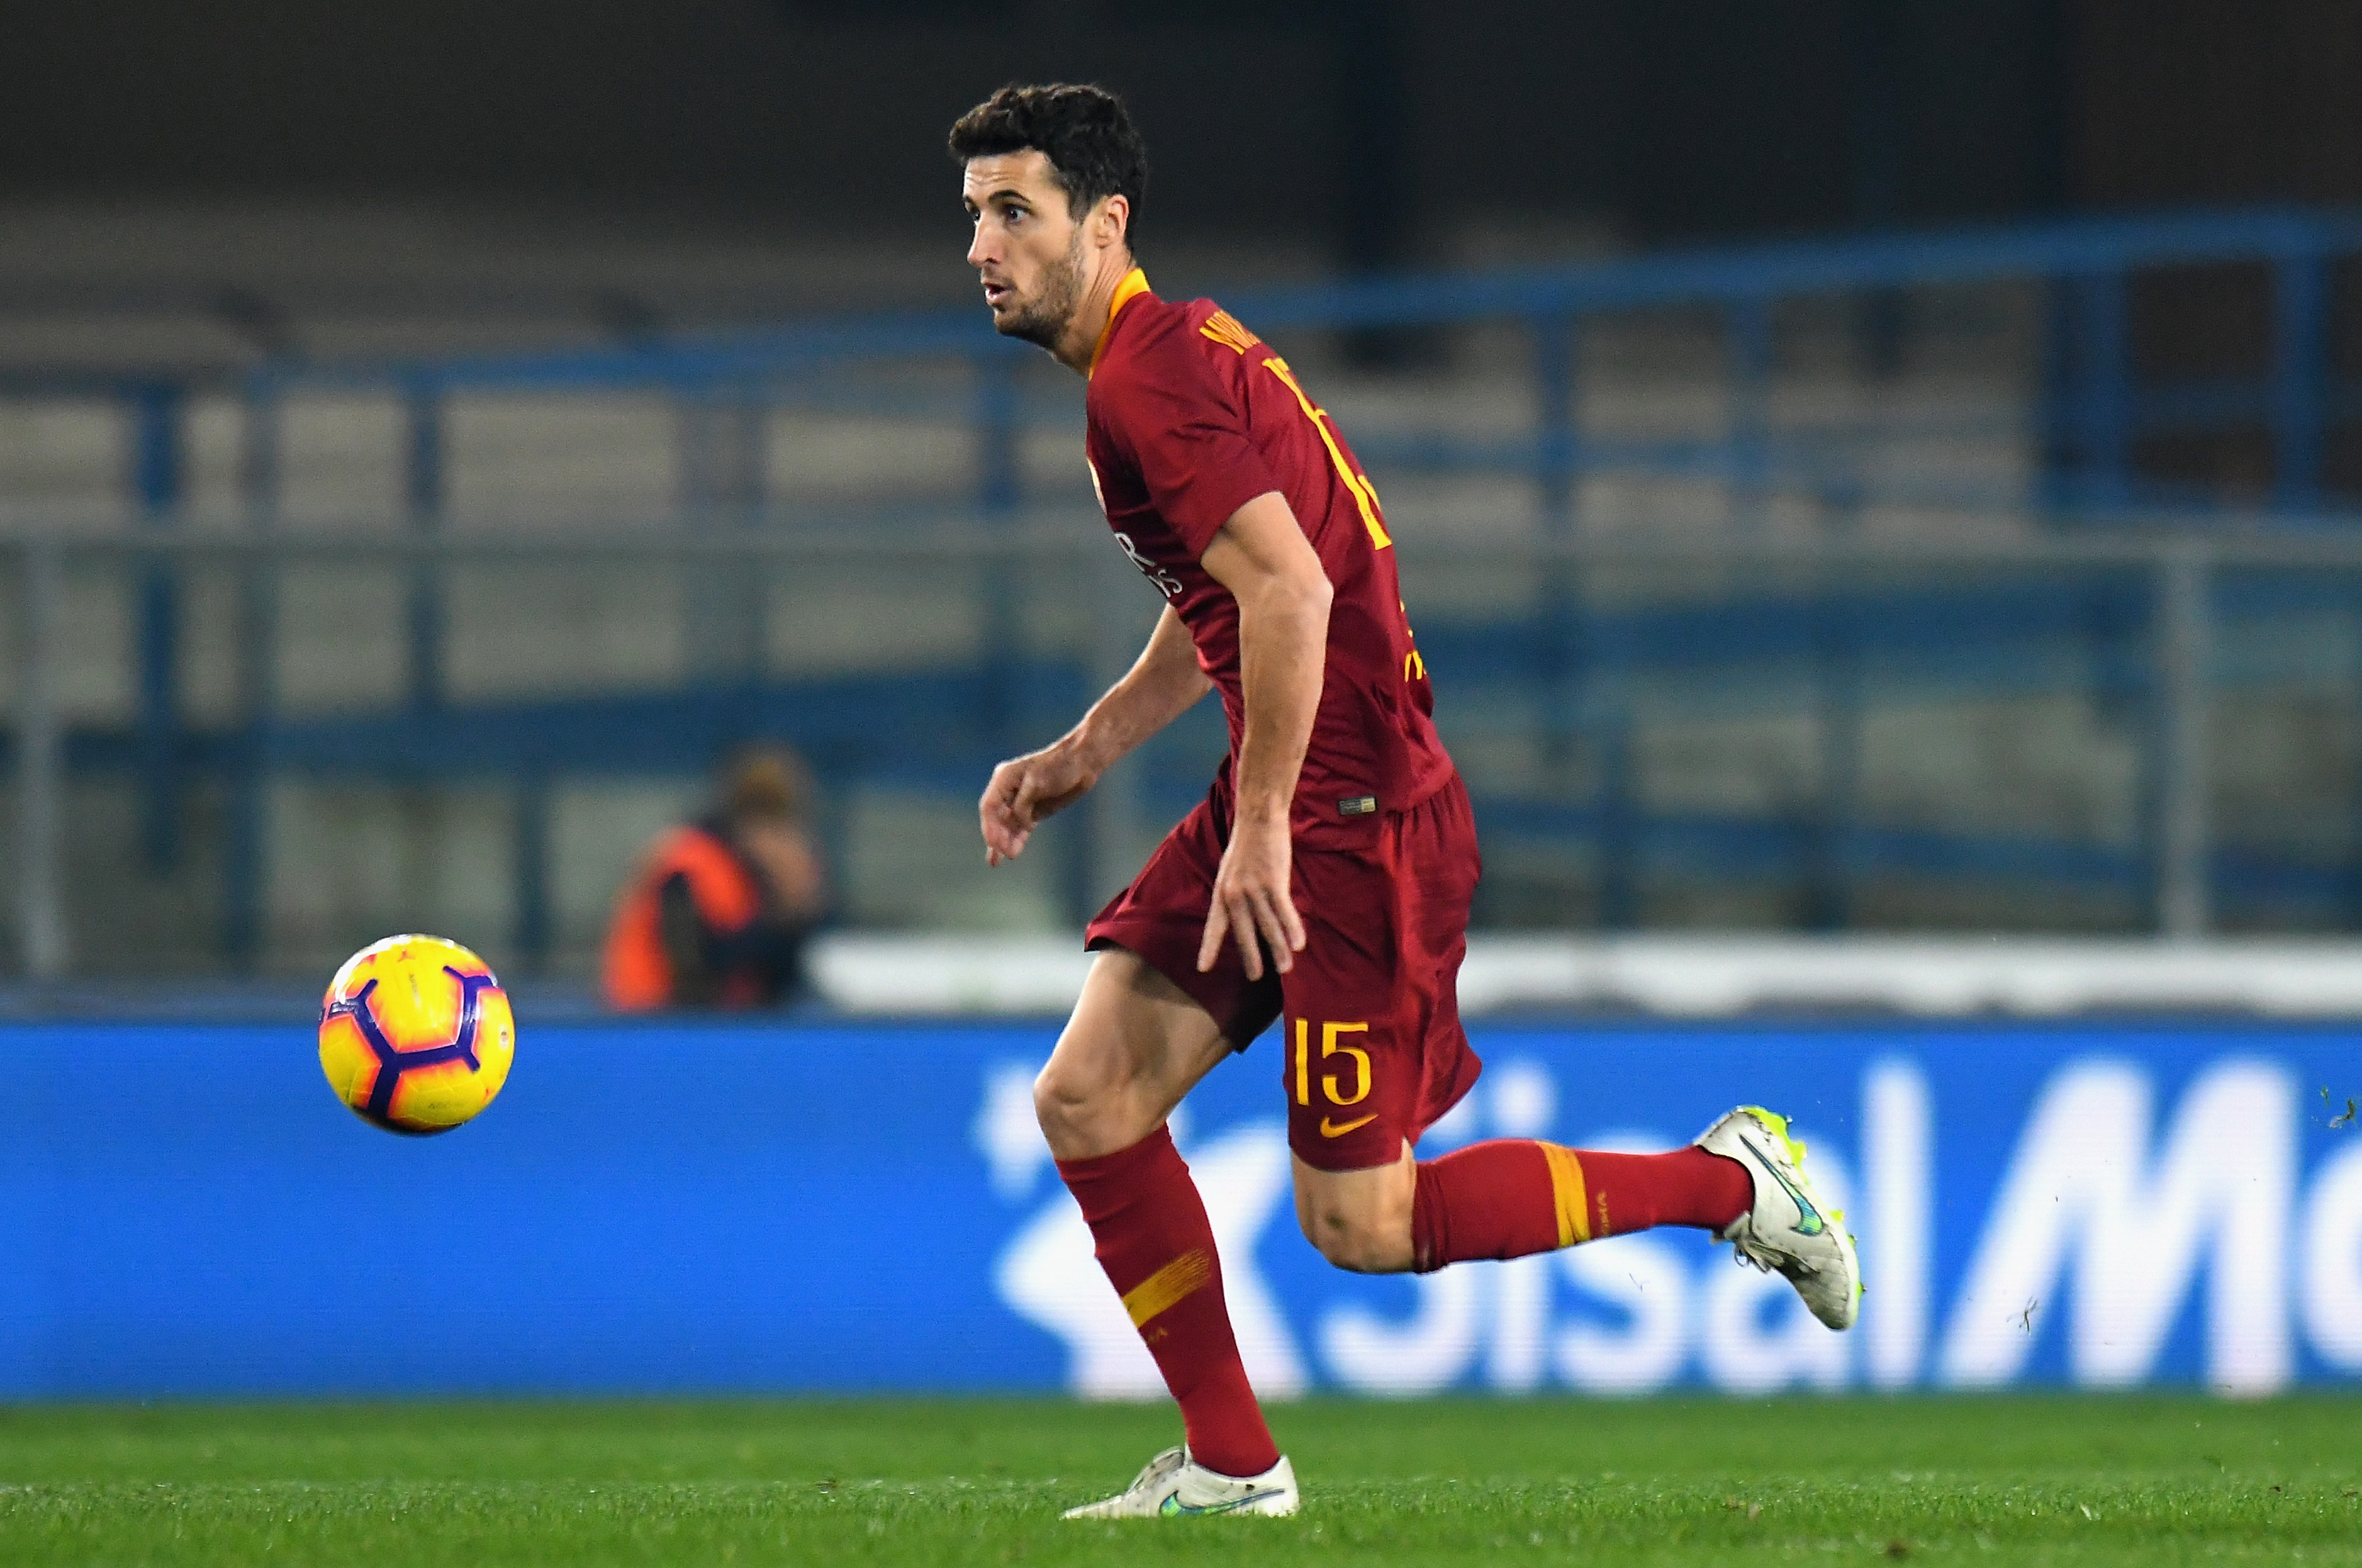 VERONA, ITALY - FEBRUARY 08:  Ivan Marcano of AS Roma in action during the Serie A match between Chievo Verona and AS Roma at Stadio Marc'Antonio Bentegodi on February 8, 2019 in Verona, Italy.  (Photo by Alessandro Sabattini/Getty Images)